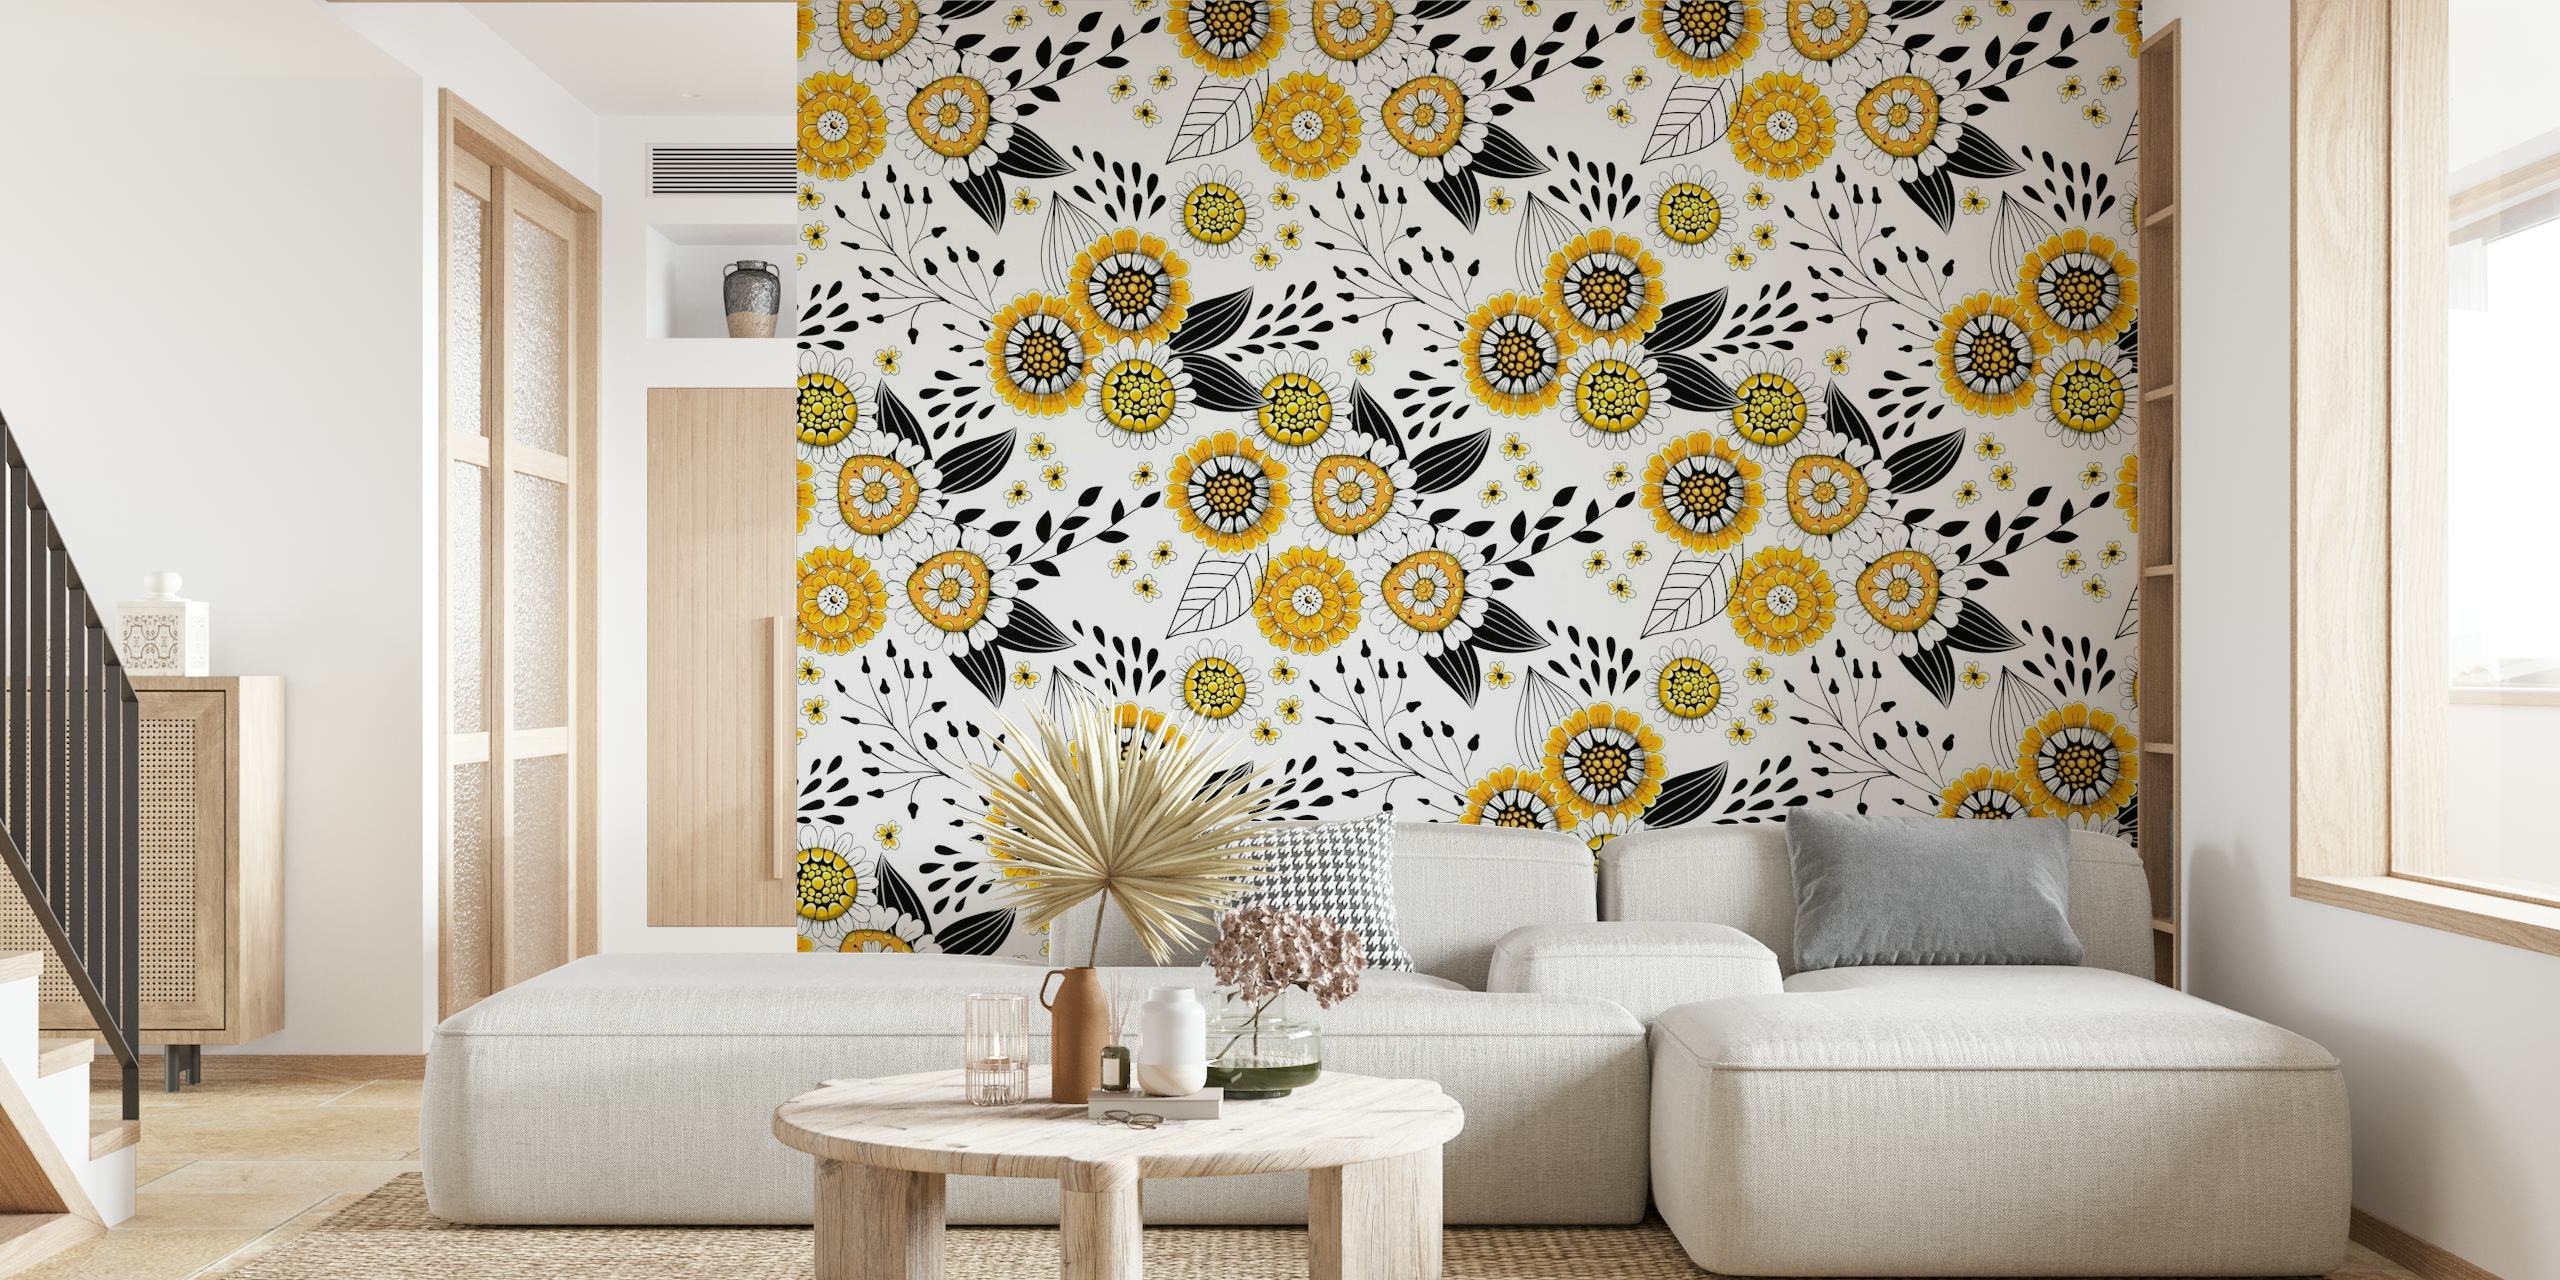 Doodle Flowers 7 wall mural with hand-drawn style yellow flowers and black details.